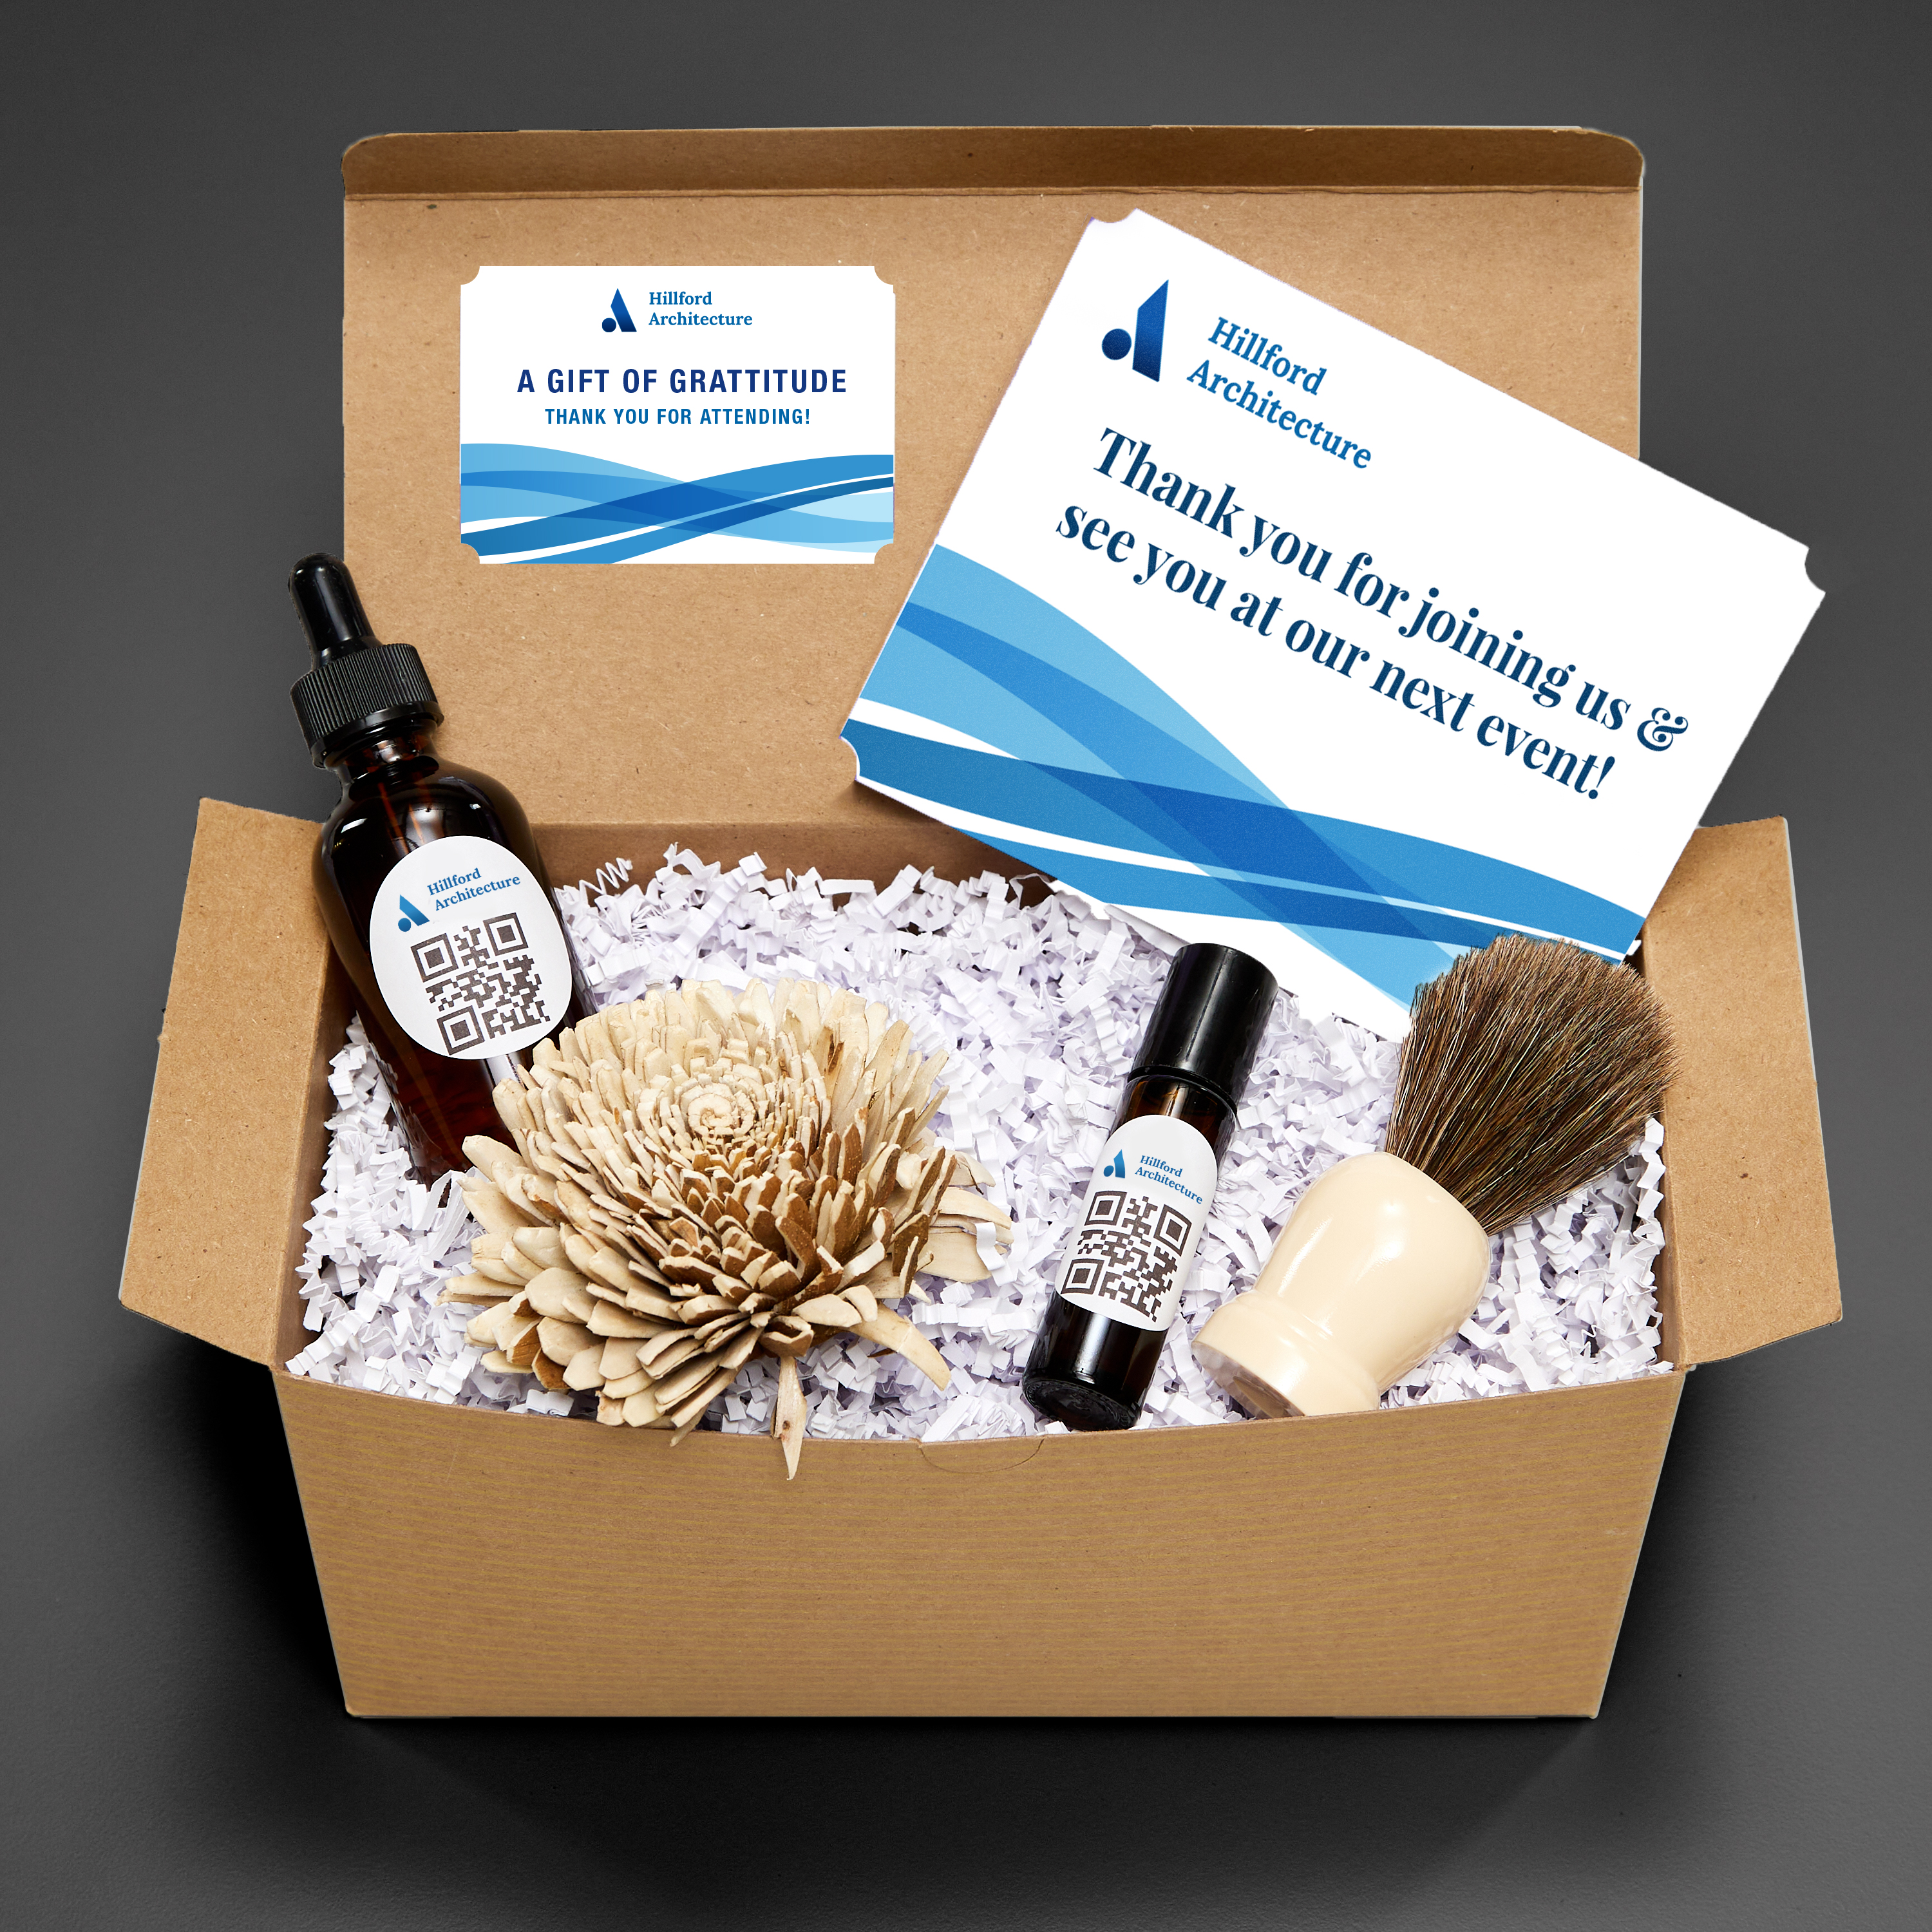 Swag bag idea for bundling products with like items. Glass apothecary bottles are shown in a cardboard box with a shaving brush and a custom-printed postcard. 